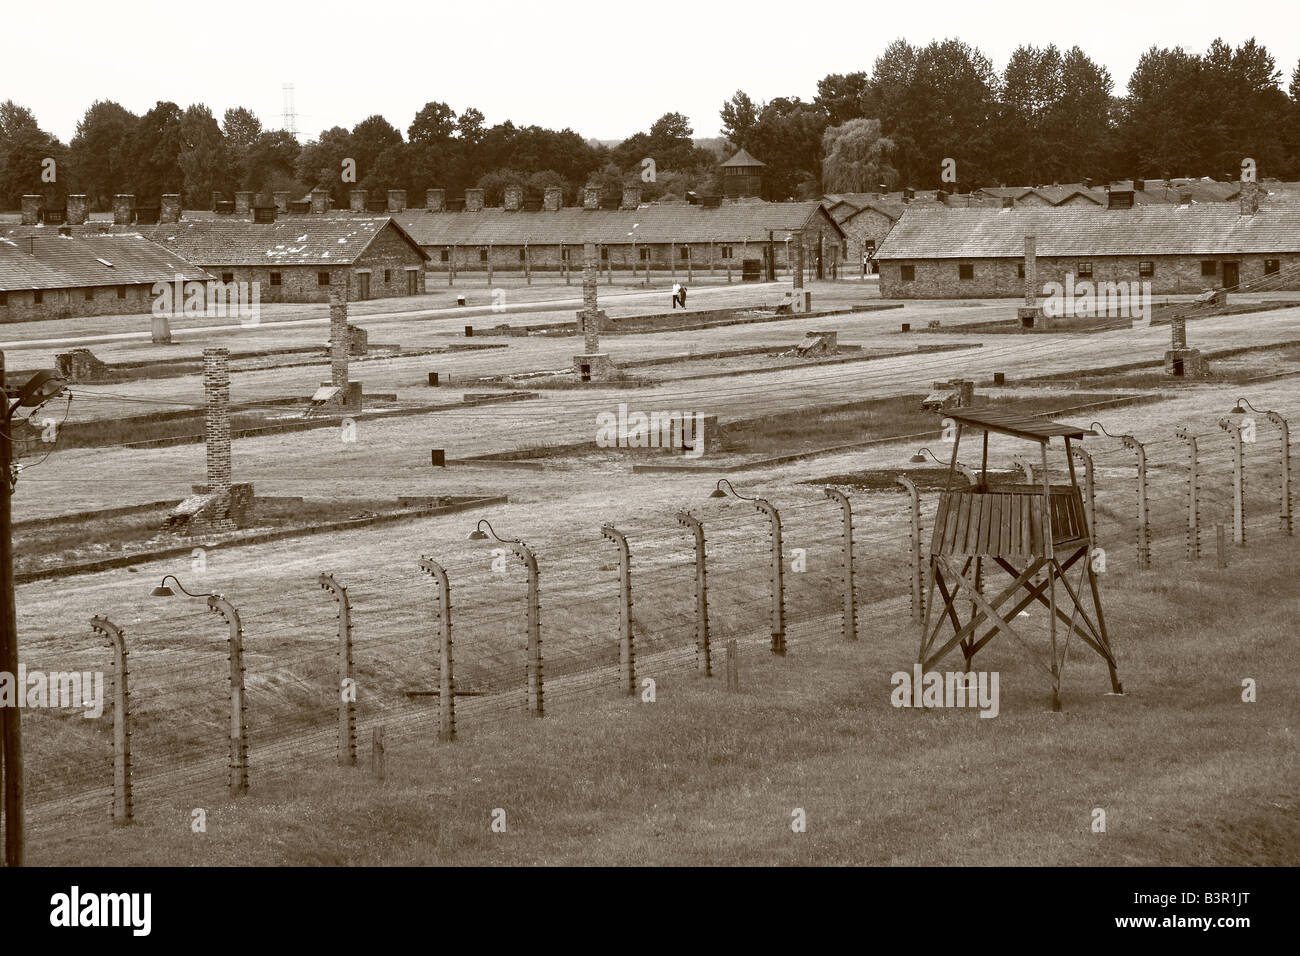 View of barracks. watchtower and fencing at Auschwitz-Birkenau concentration camp Stock Photo